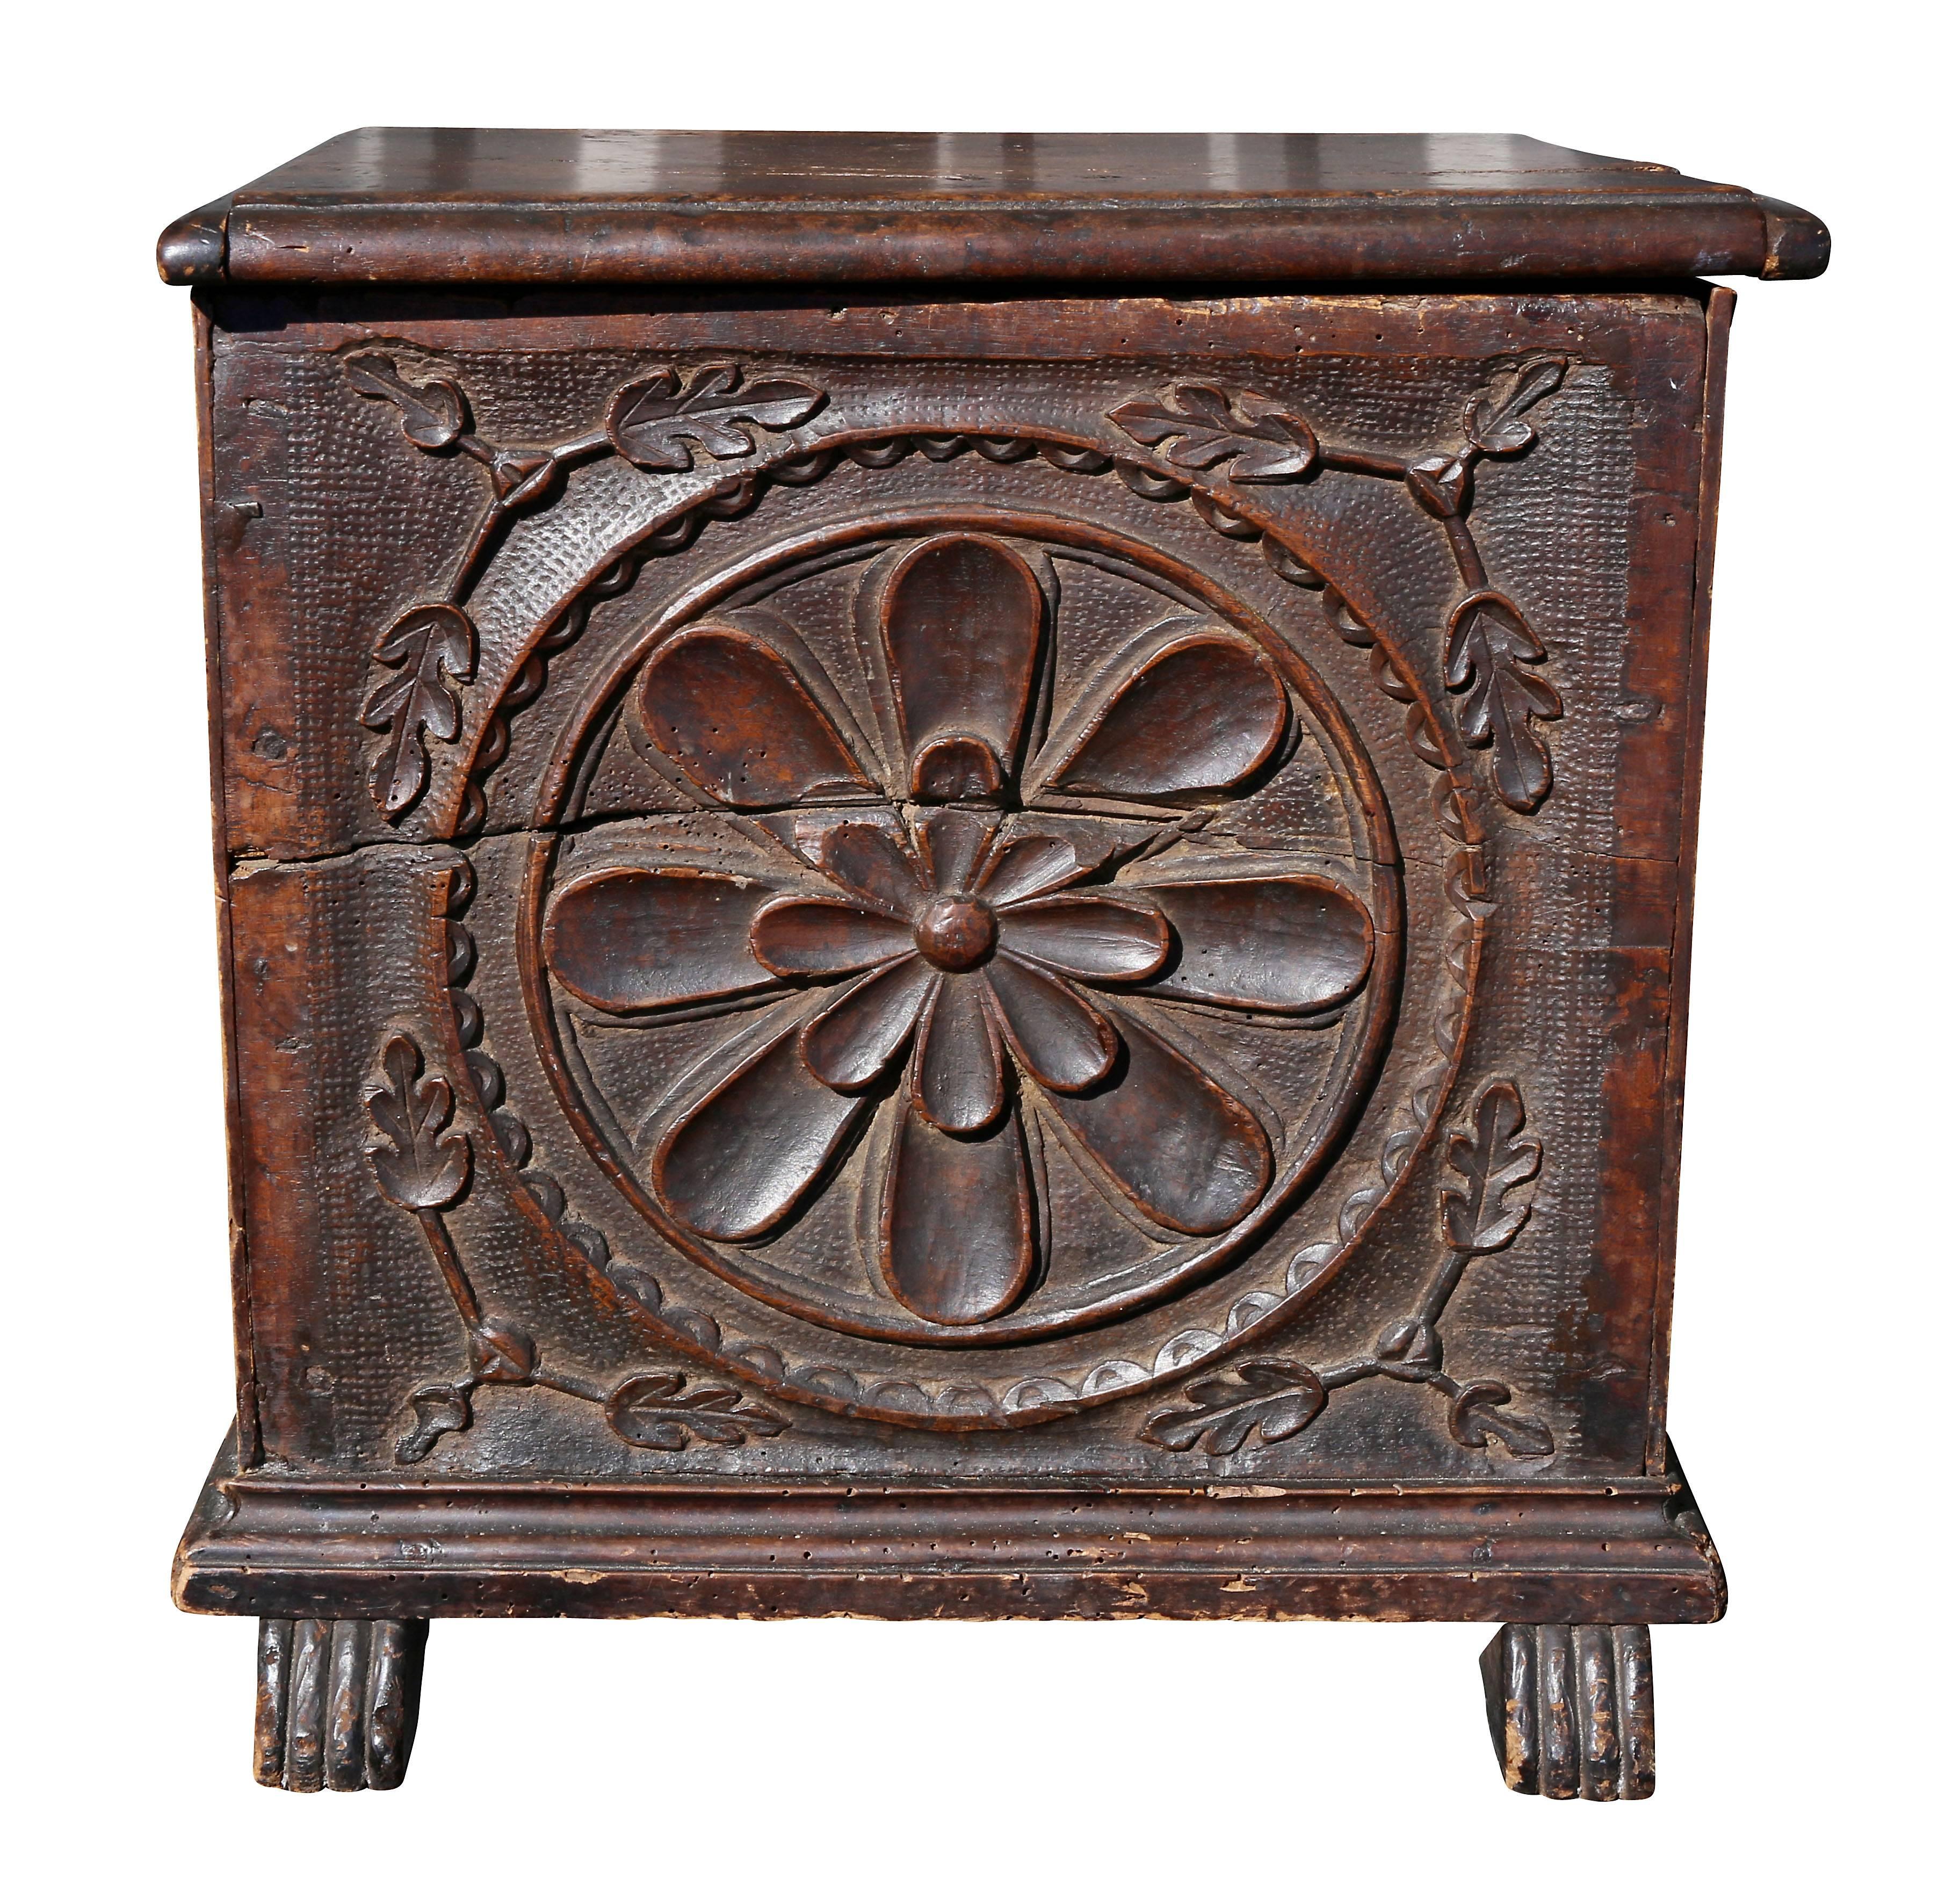 With hinged top over a panel carved with a circular floral panel surrounded by leaves, shoe feet.